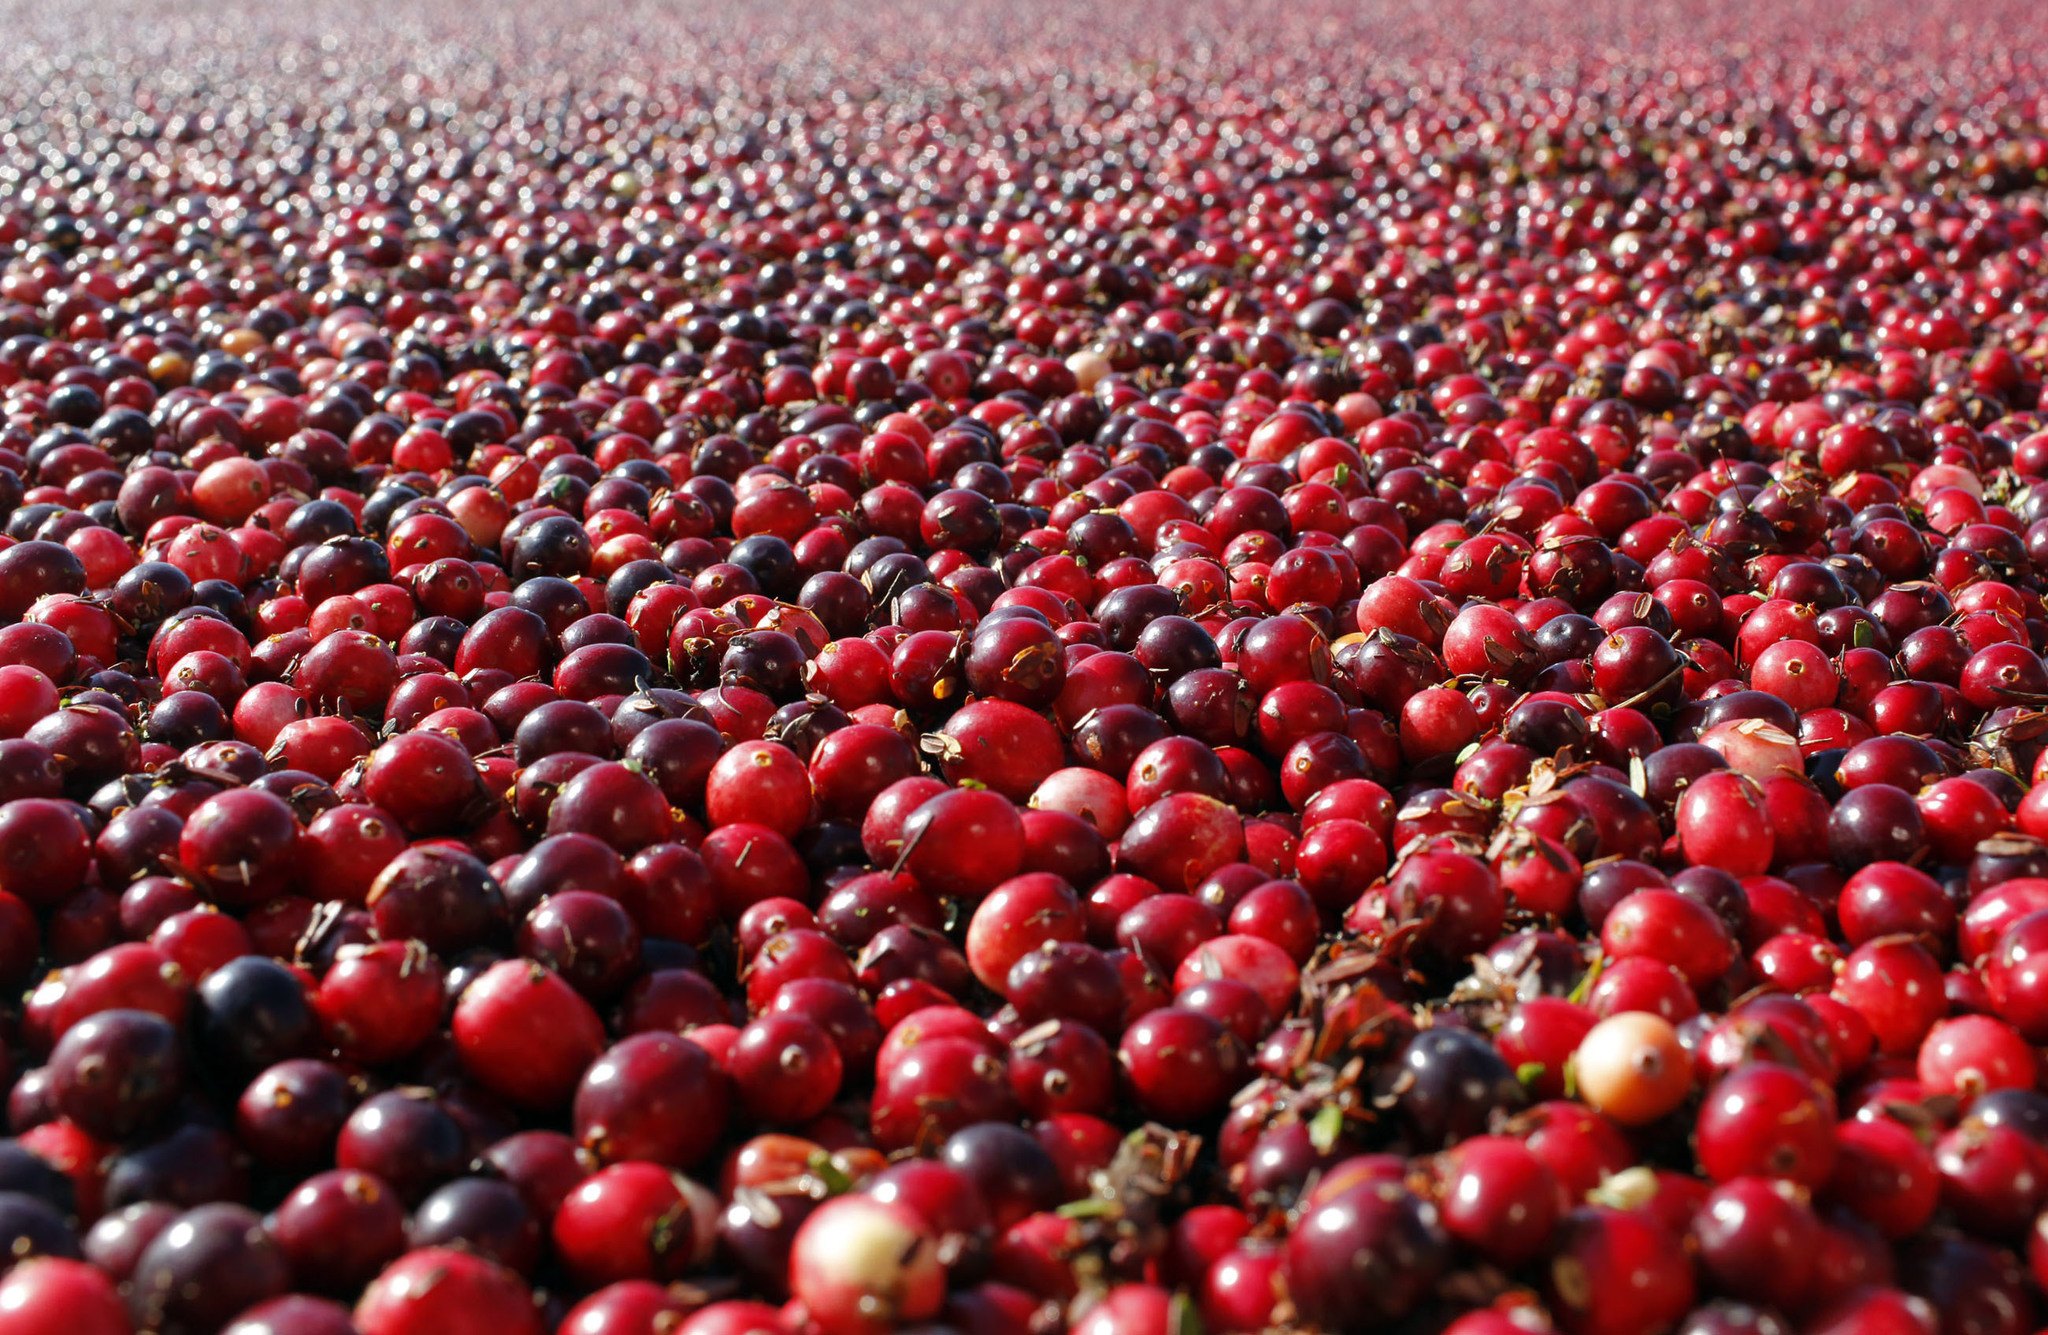 Study finds cranberries ineffective for urinary infections